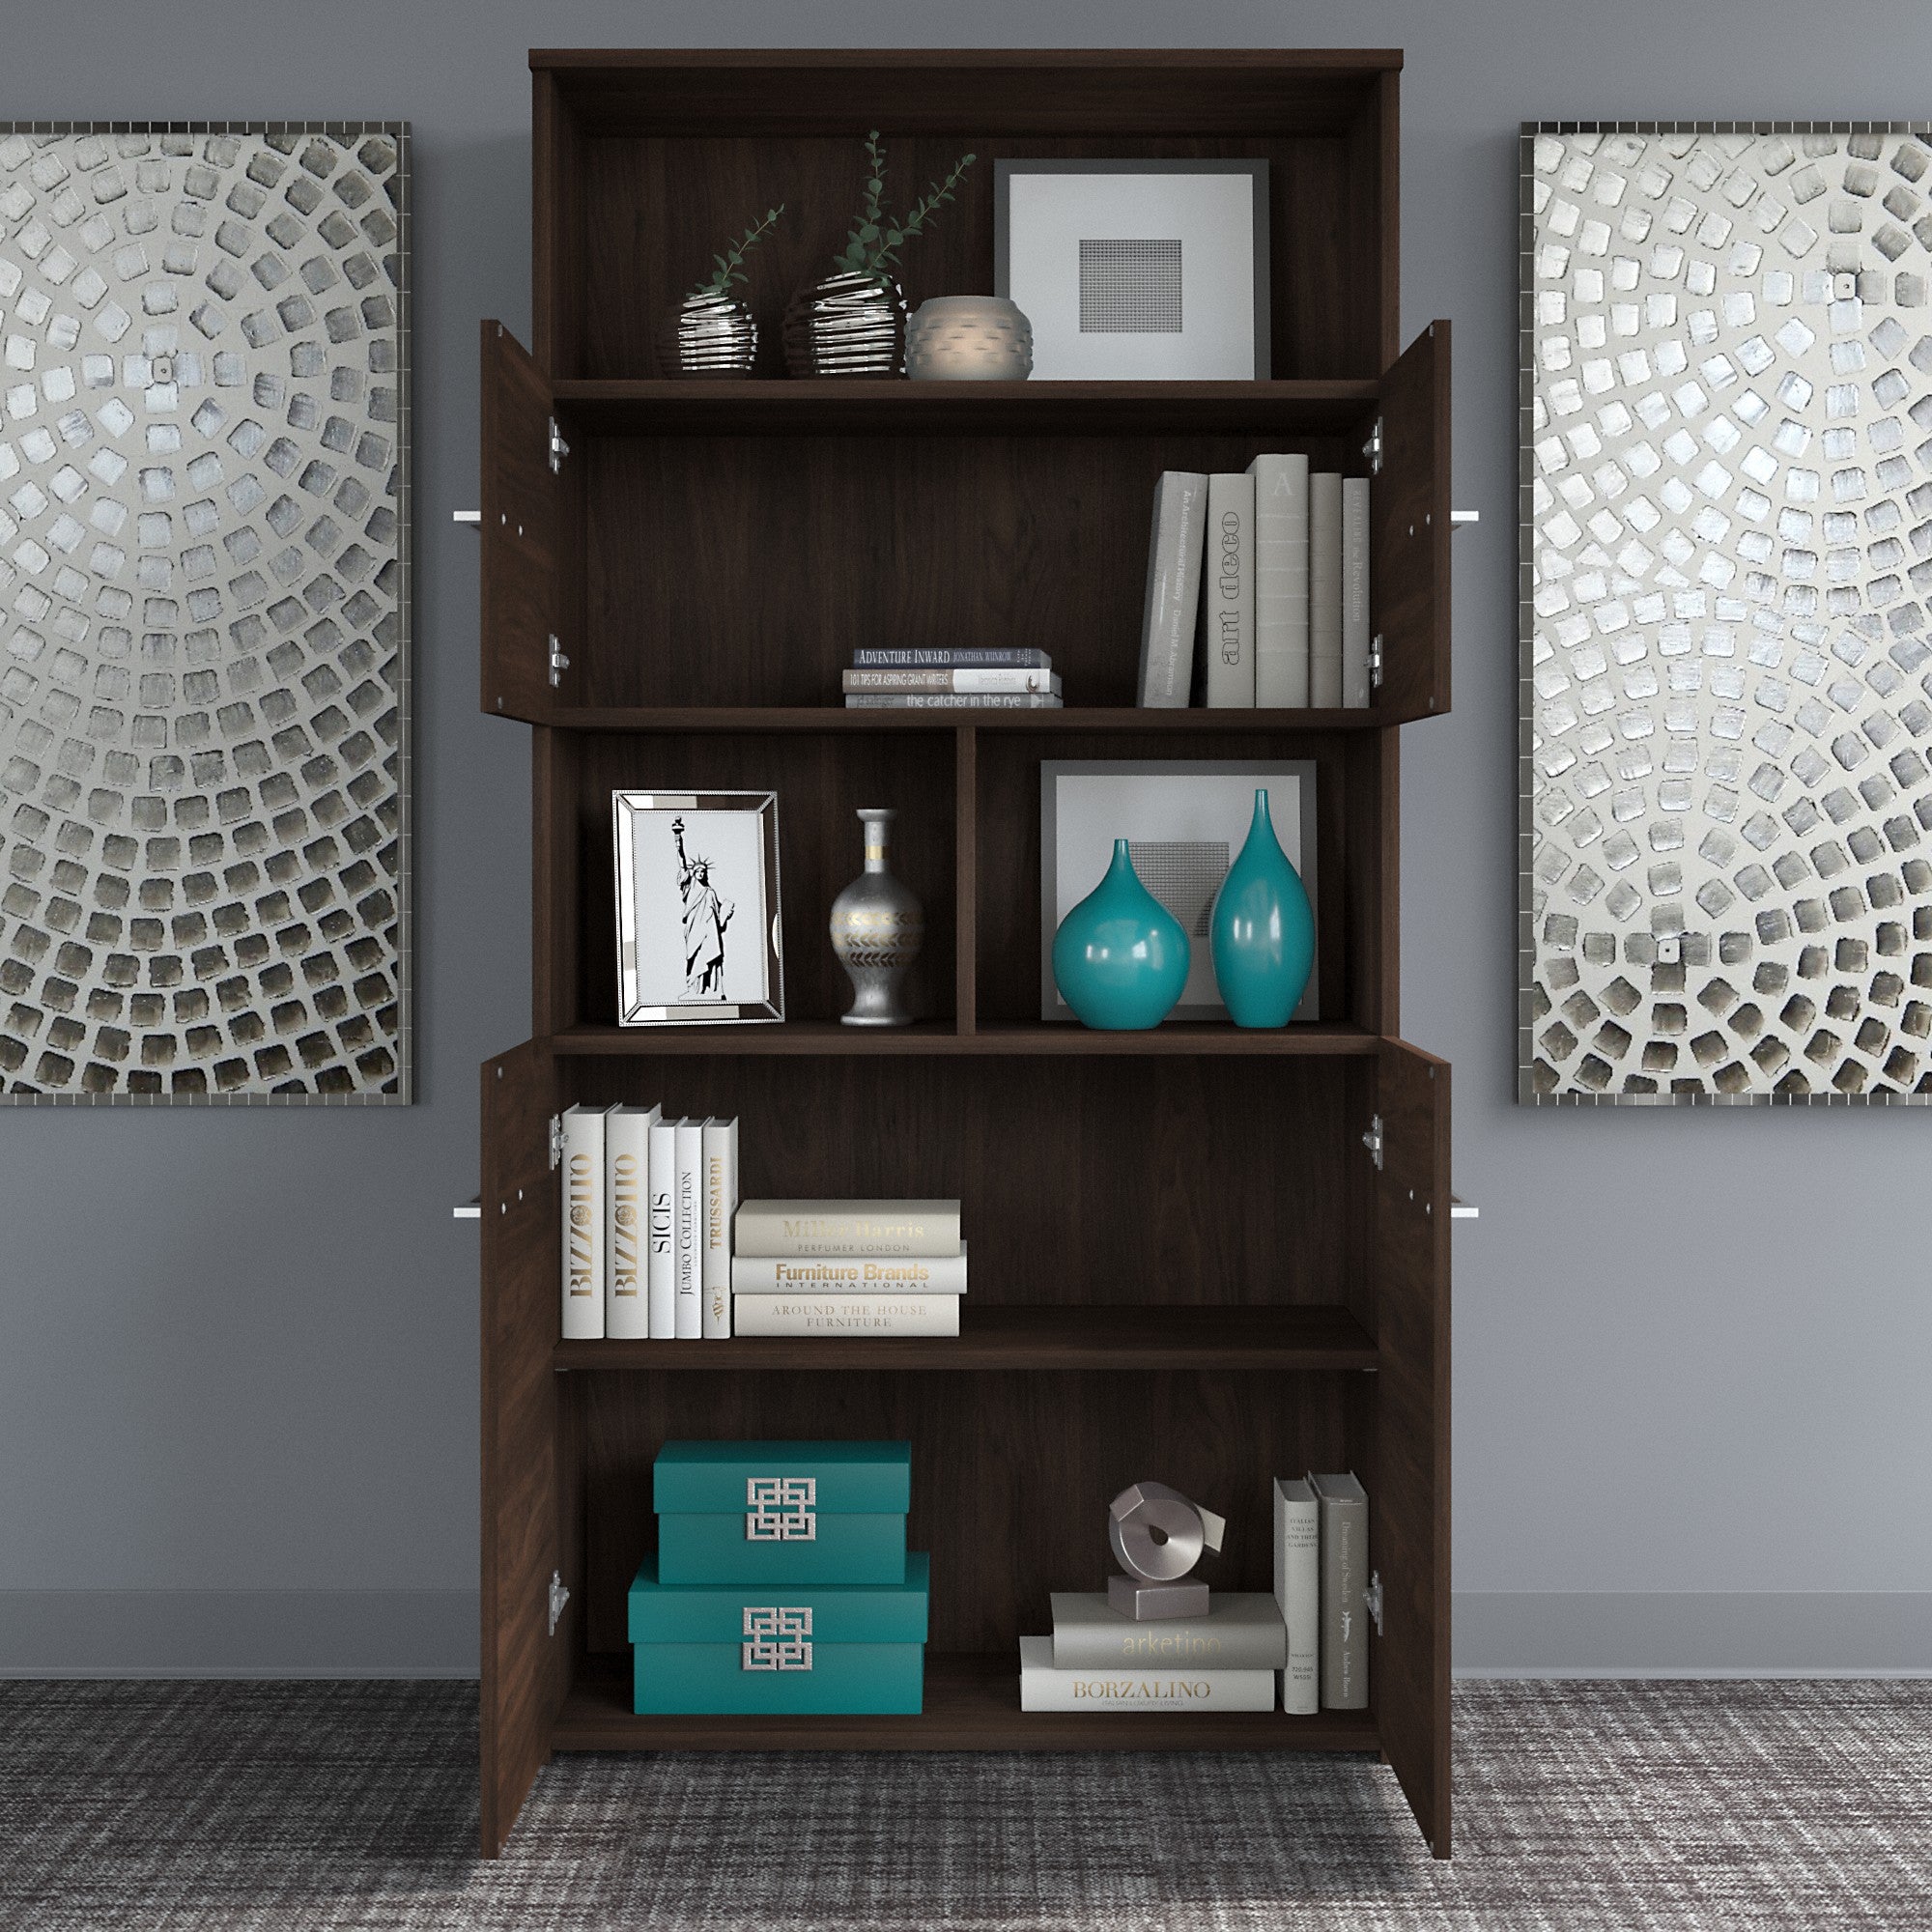 Bush Business Furniture Office 500 5 Shelf Bookcase with Doors